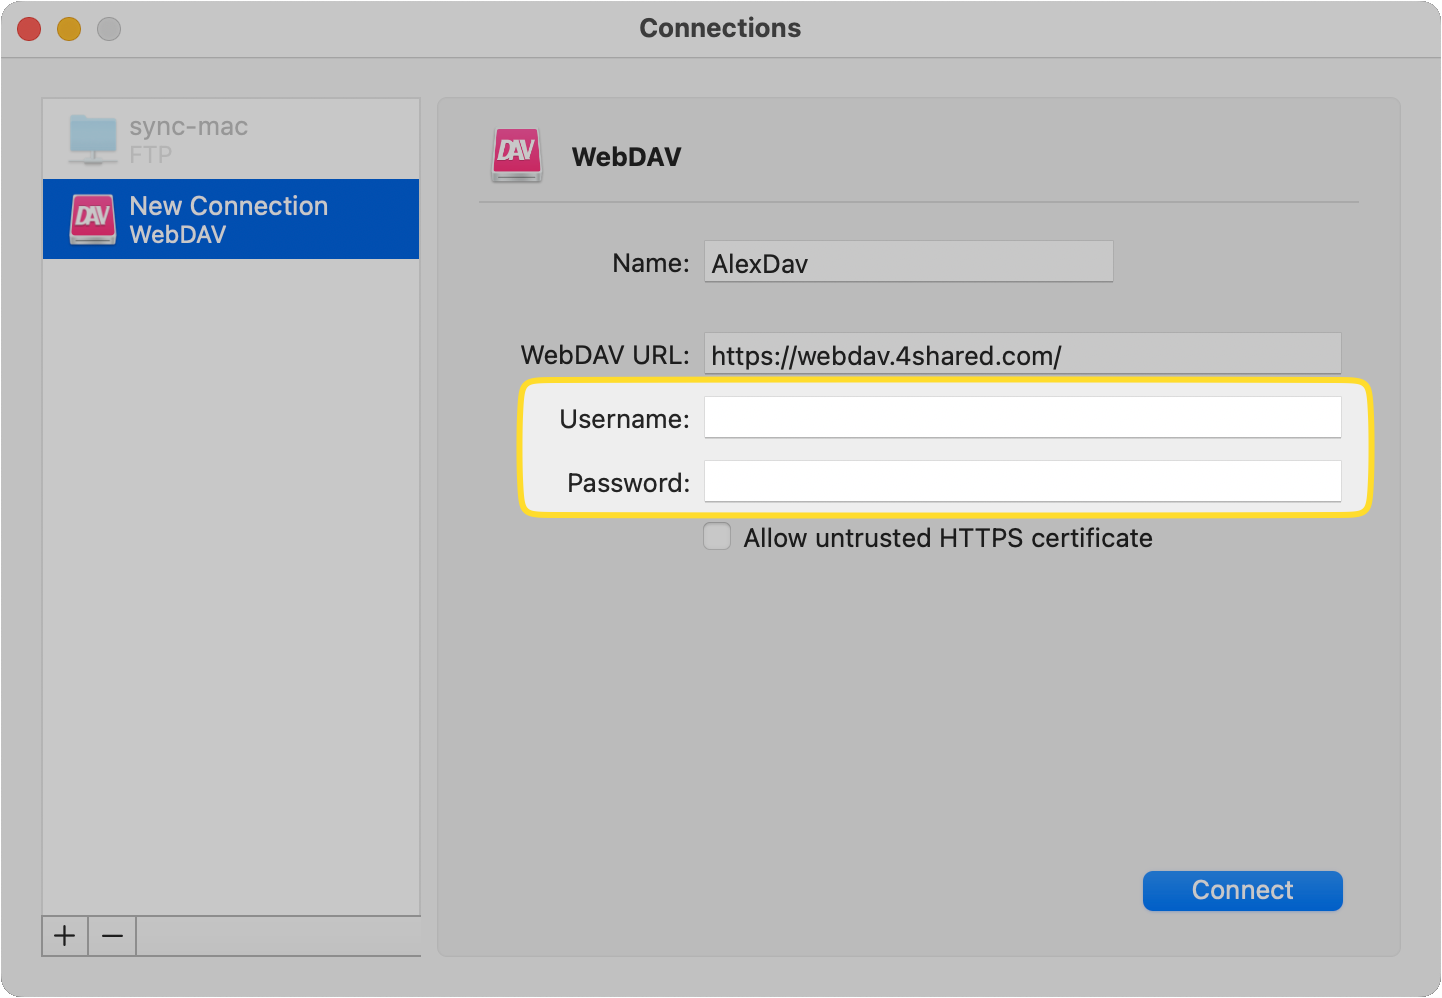 The Username and Password fields of the new WebDAV connection are demonstrated